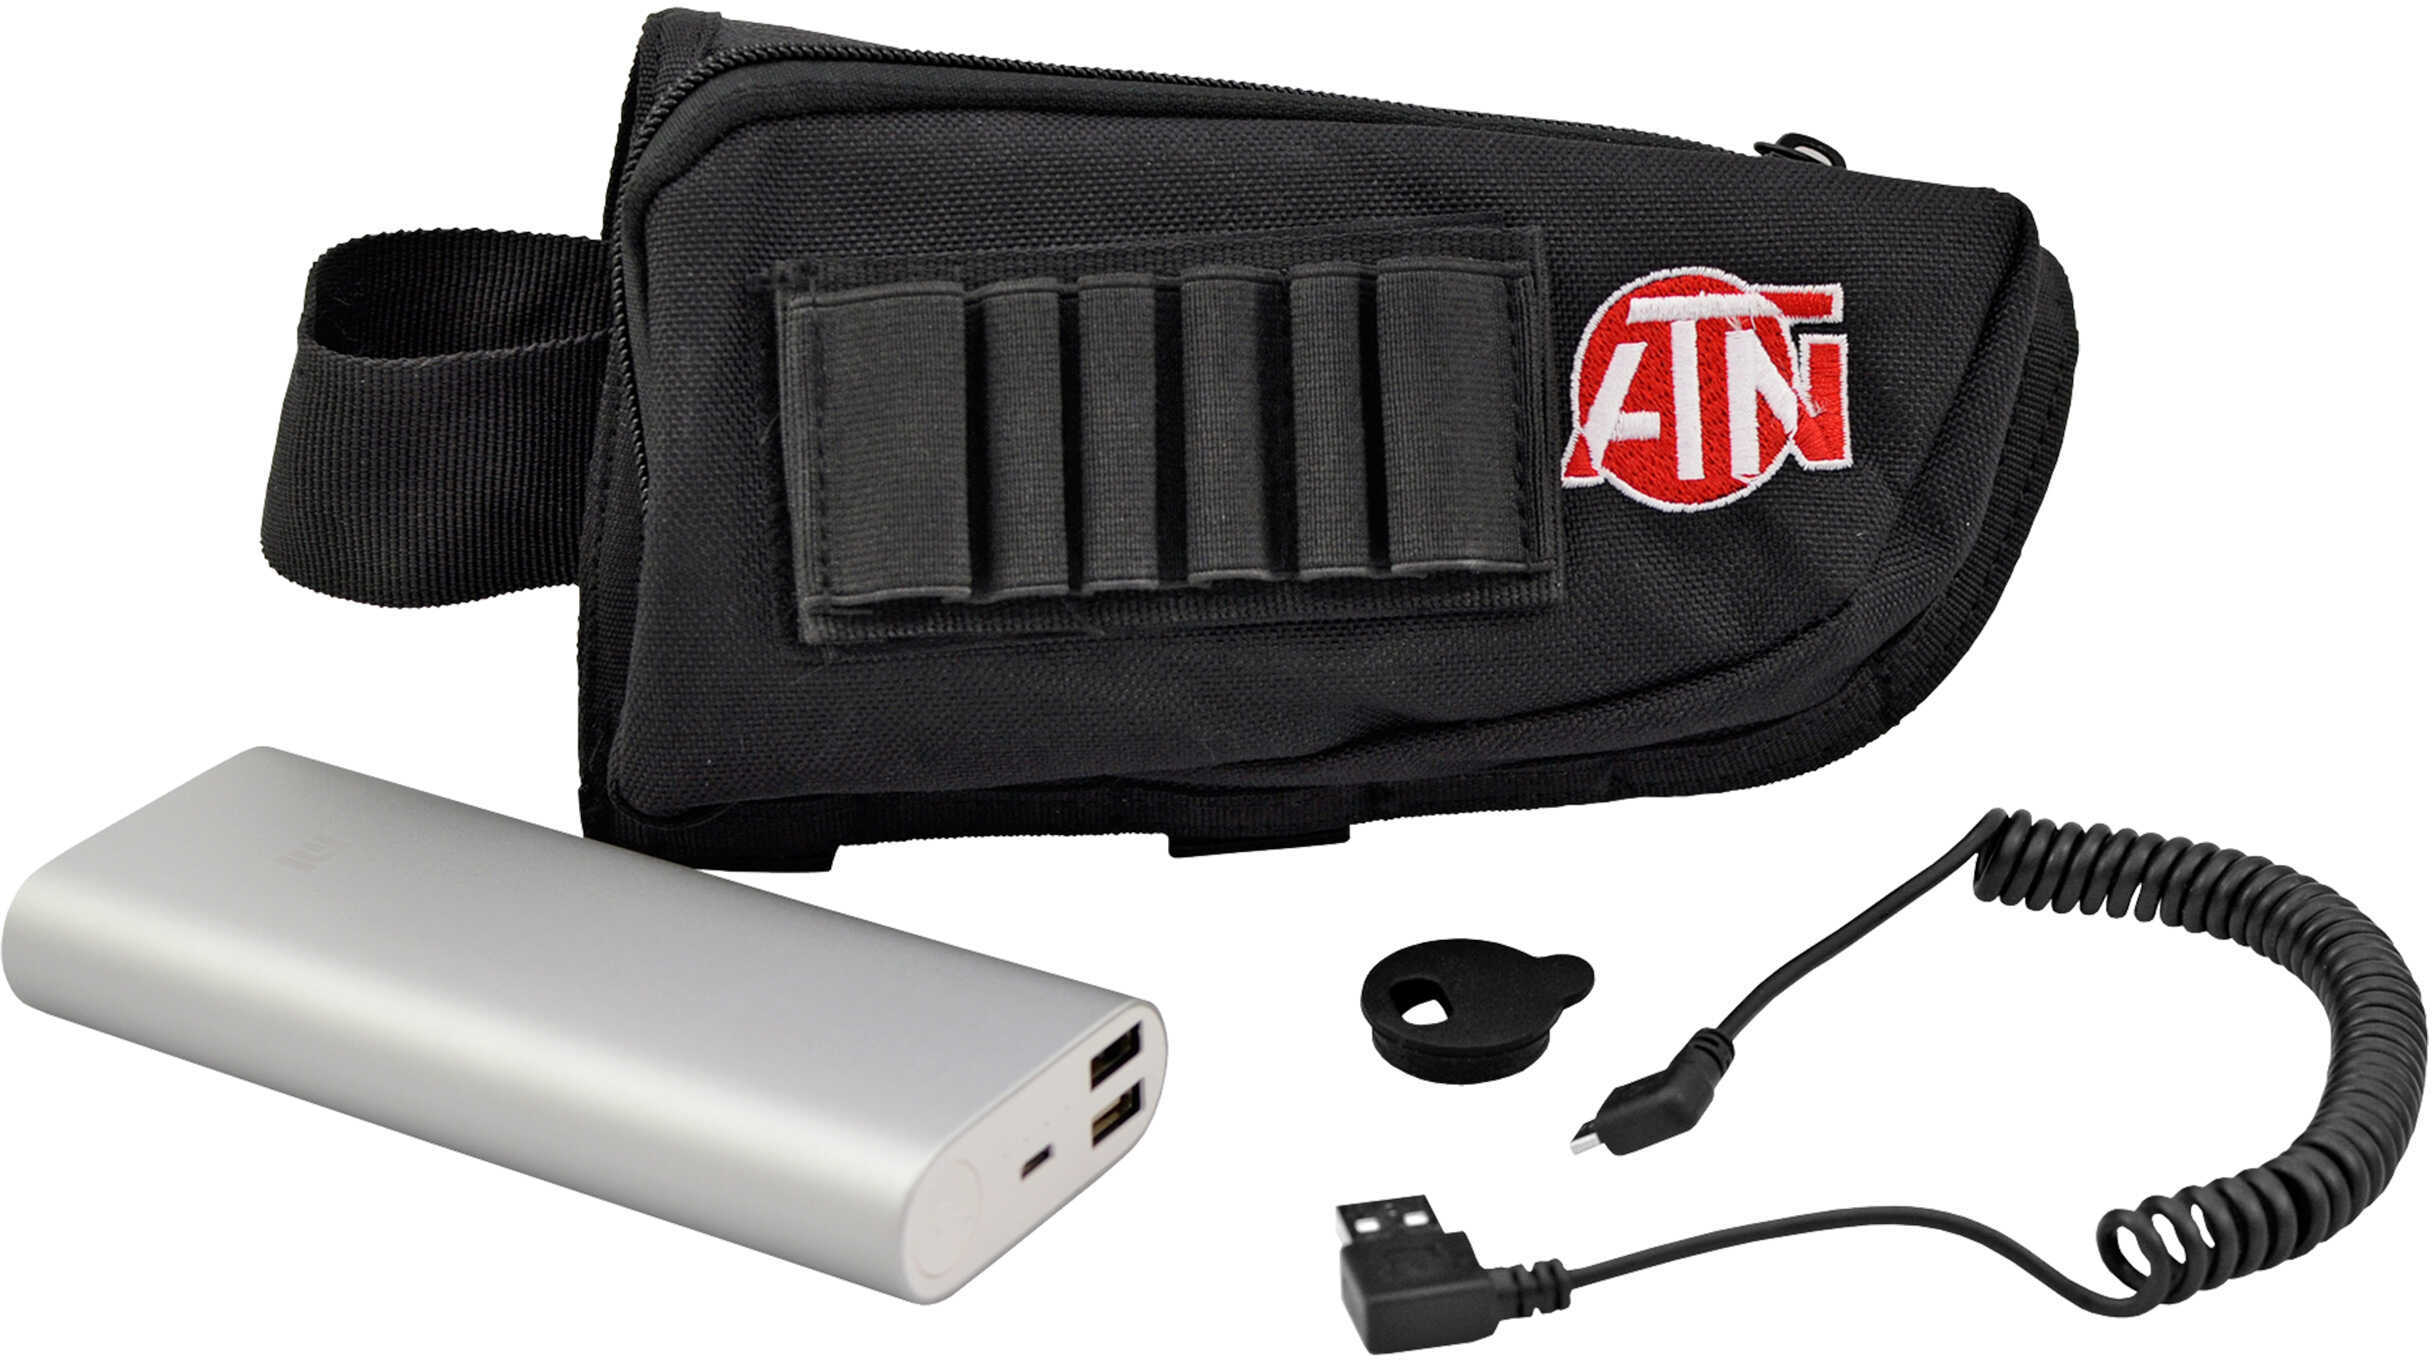 ATN Power Weapon Kit Extended Life Battery Pack 20000 mAh For Smart HD